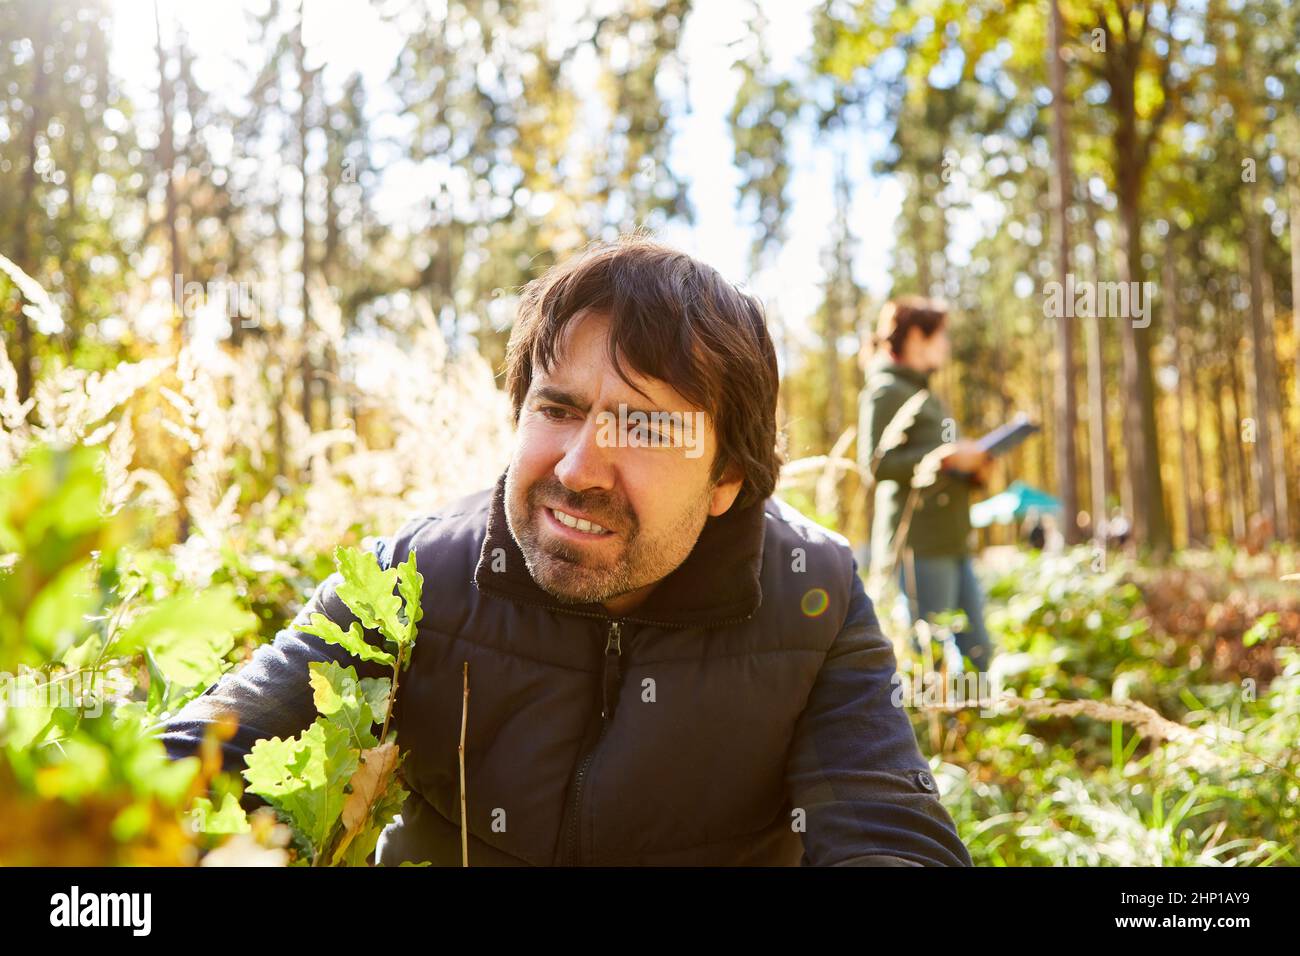 Environmentalists or foresters in the reforestation in the forest for sustainability and climate protection Stock Photo